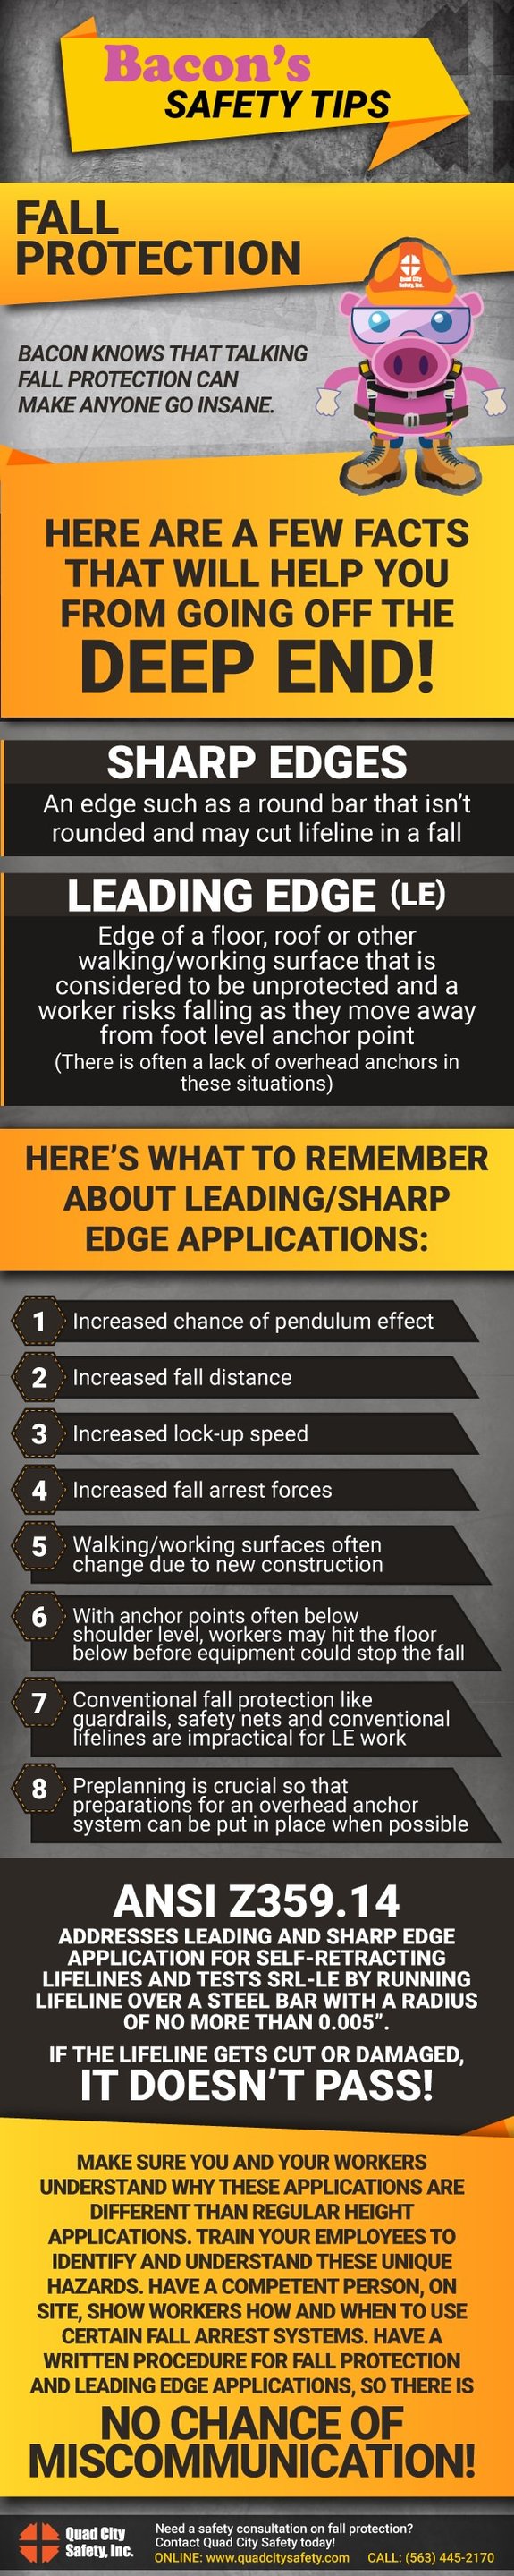 Bacon’s Safety Tips Fall protection.